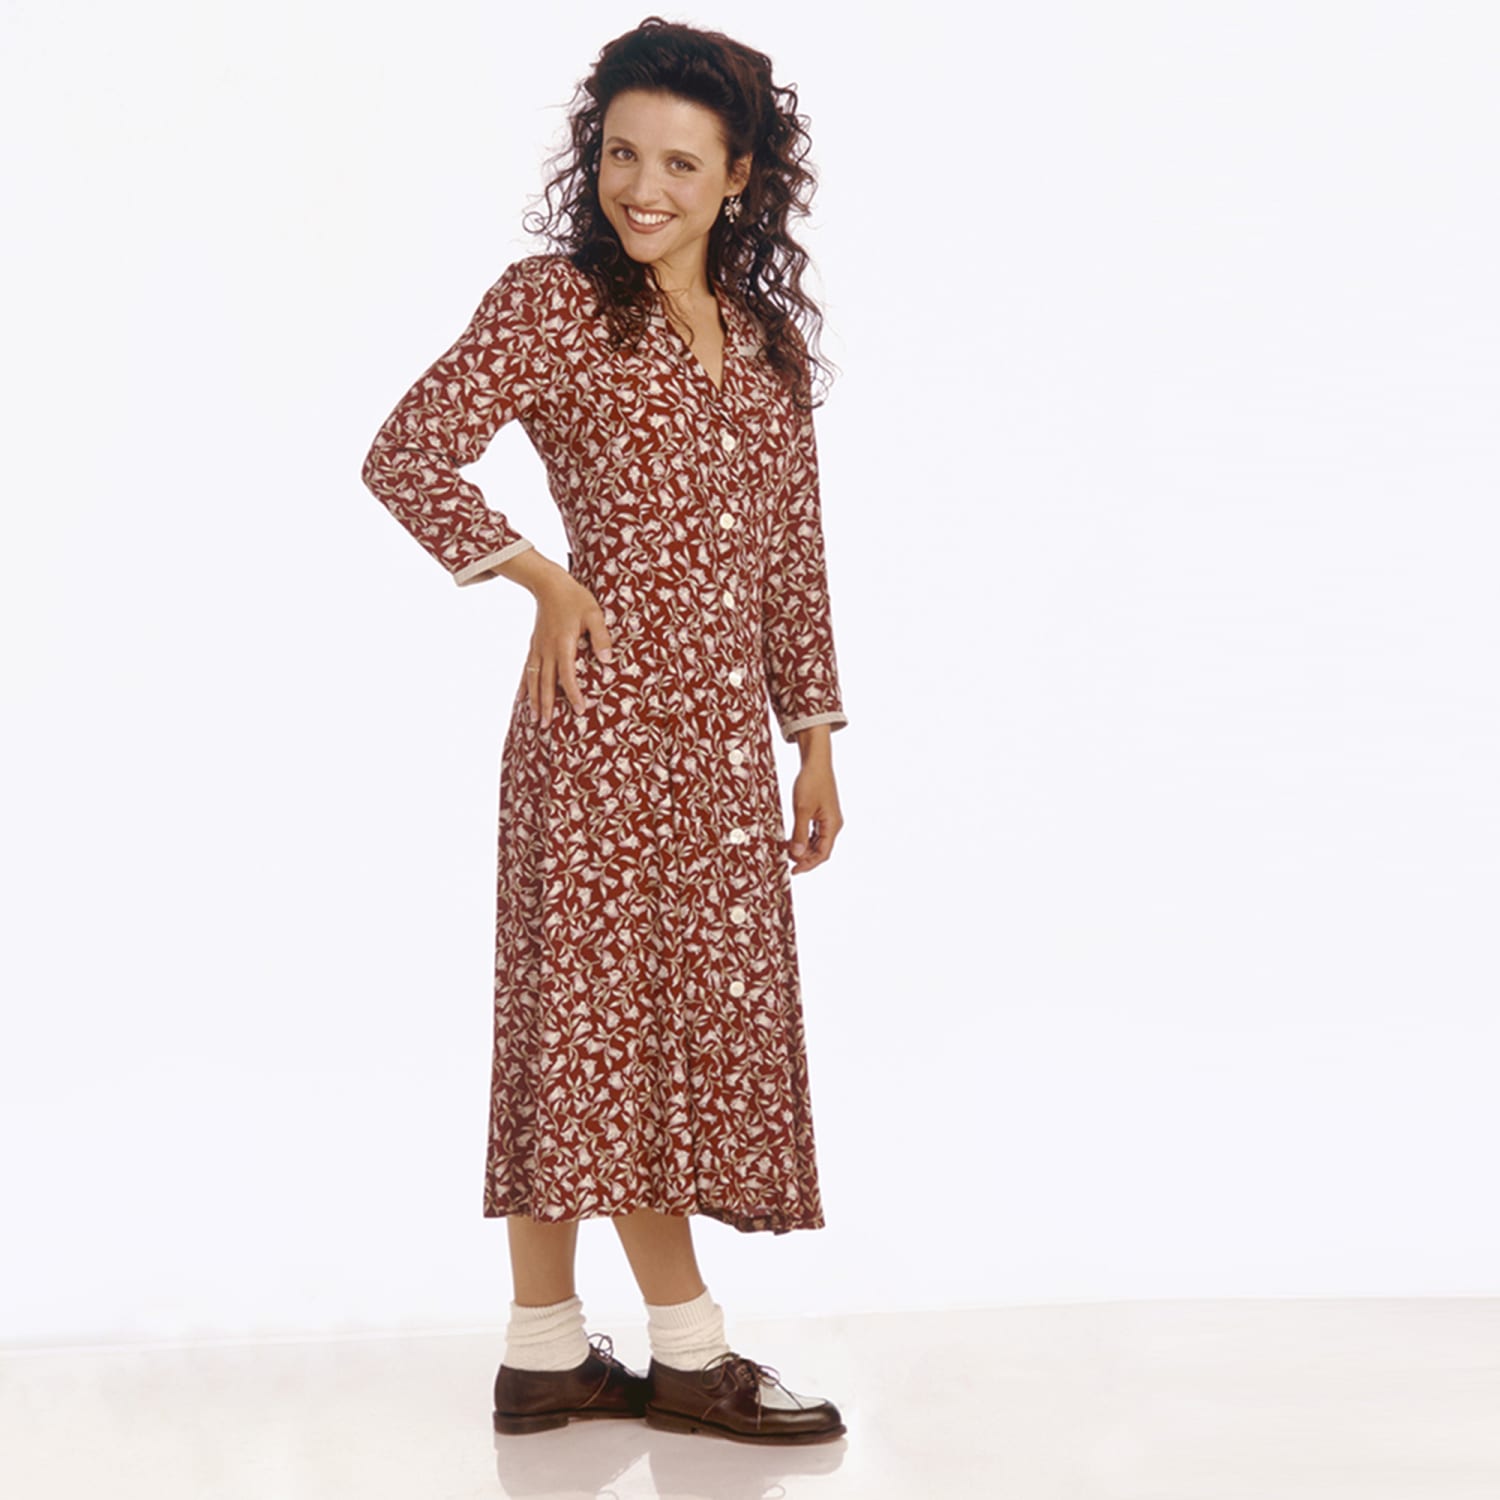 Is Elaine Benes from Seinfeld the New/Old Downtown Fashion Icon